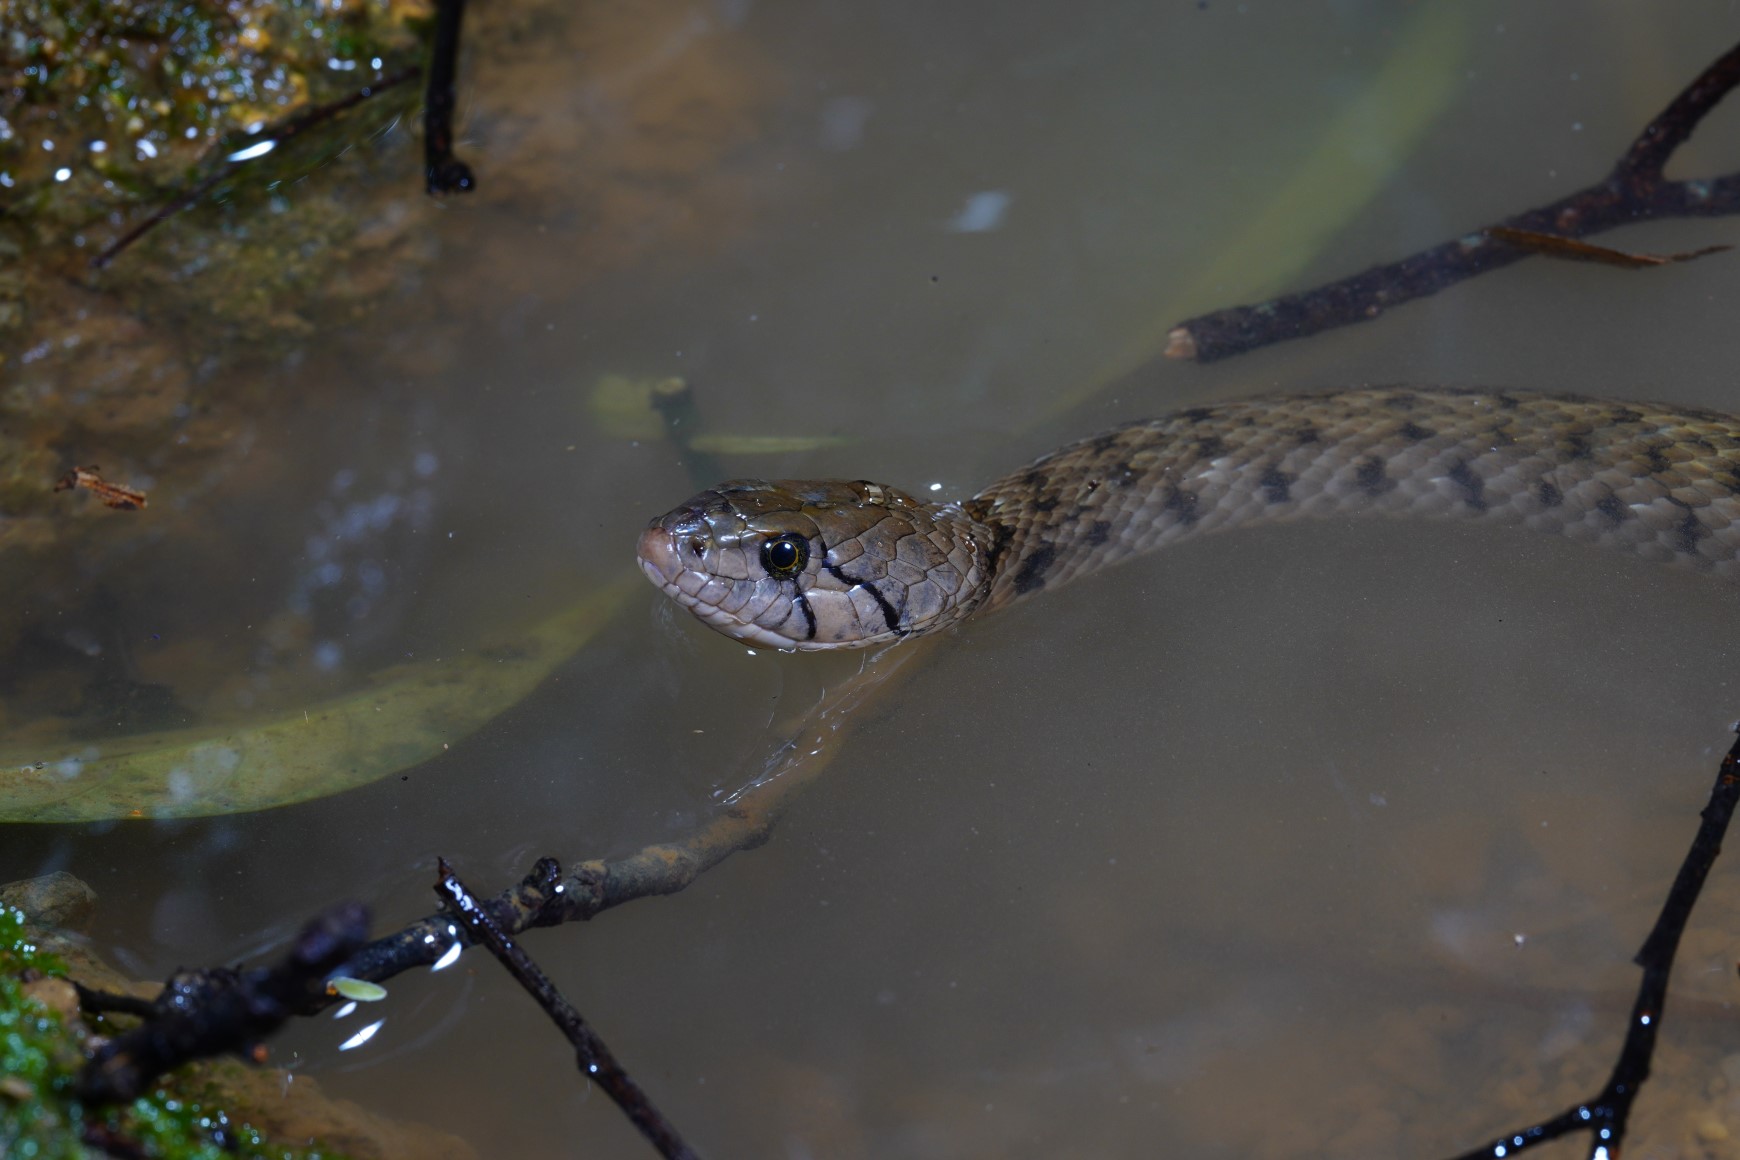 A yellow-spotted keelback (Fowlea flavipunctatus) (non-venomous) captured in Yuen Long on 16 September 2020 was released into a freshwater habitat the next day. 